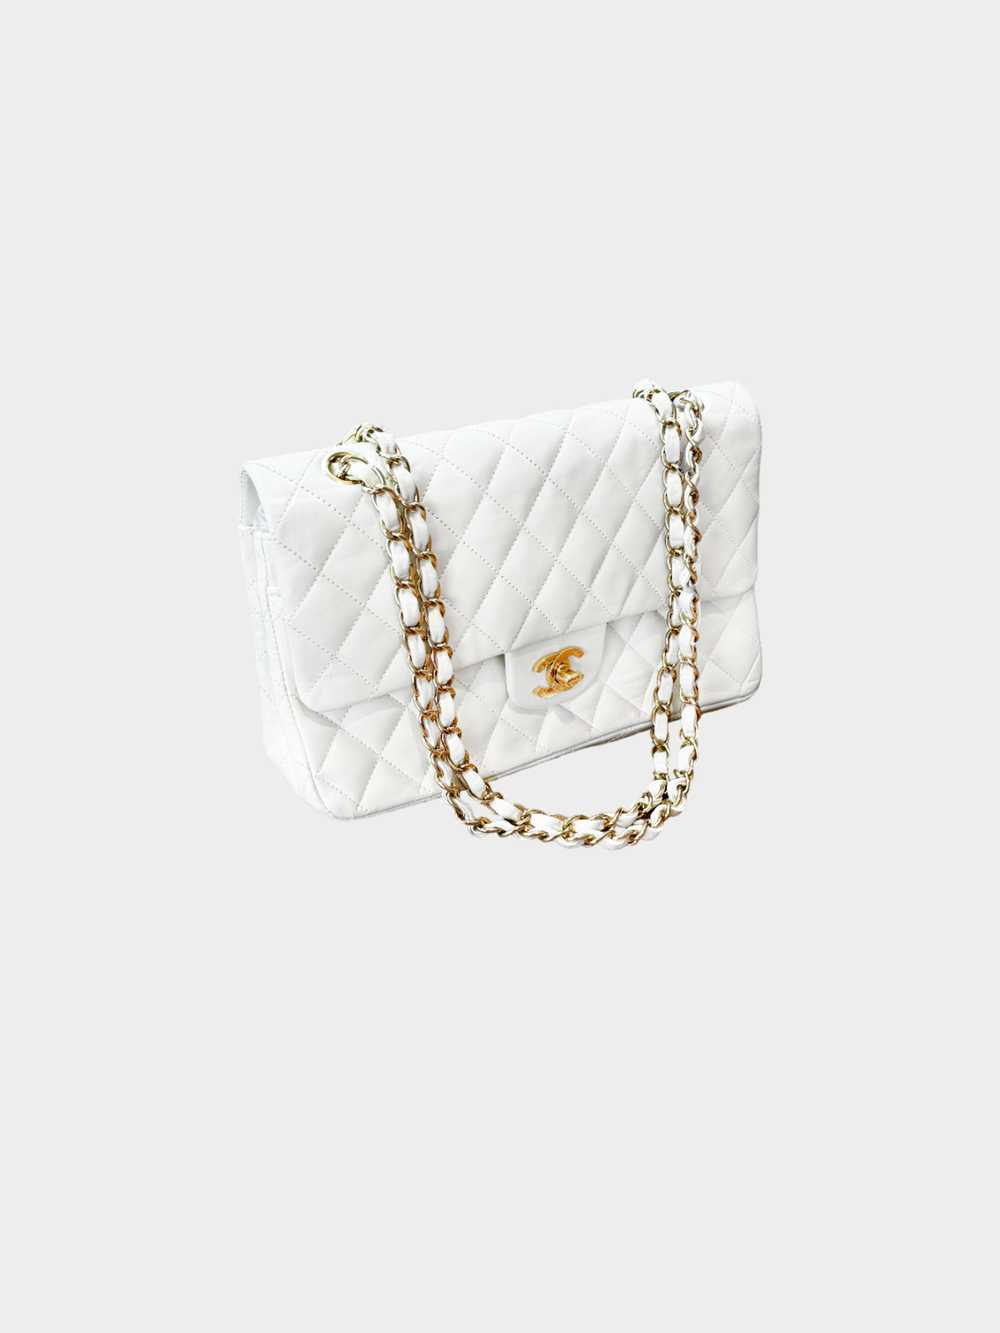 Chanel 2000s White Lambskin Leather Flap Bag - image 2